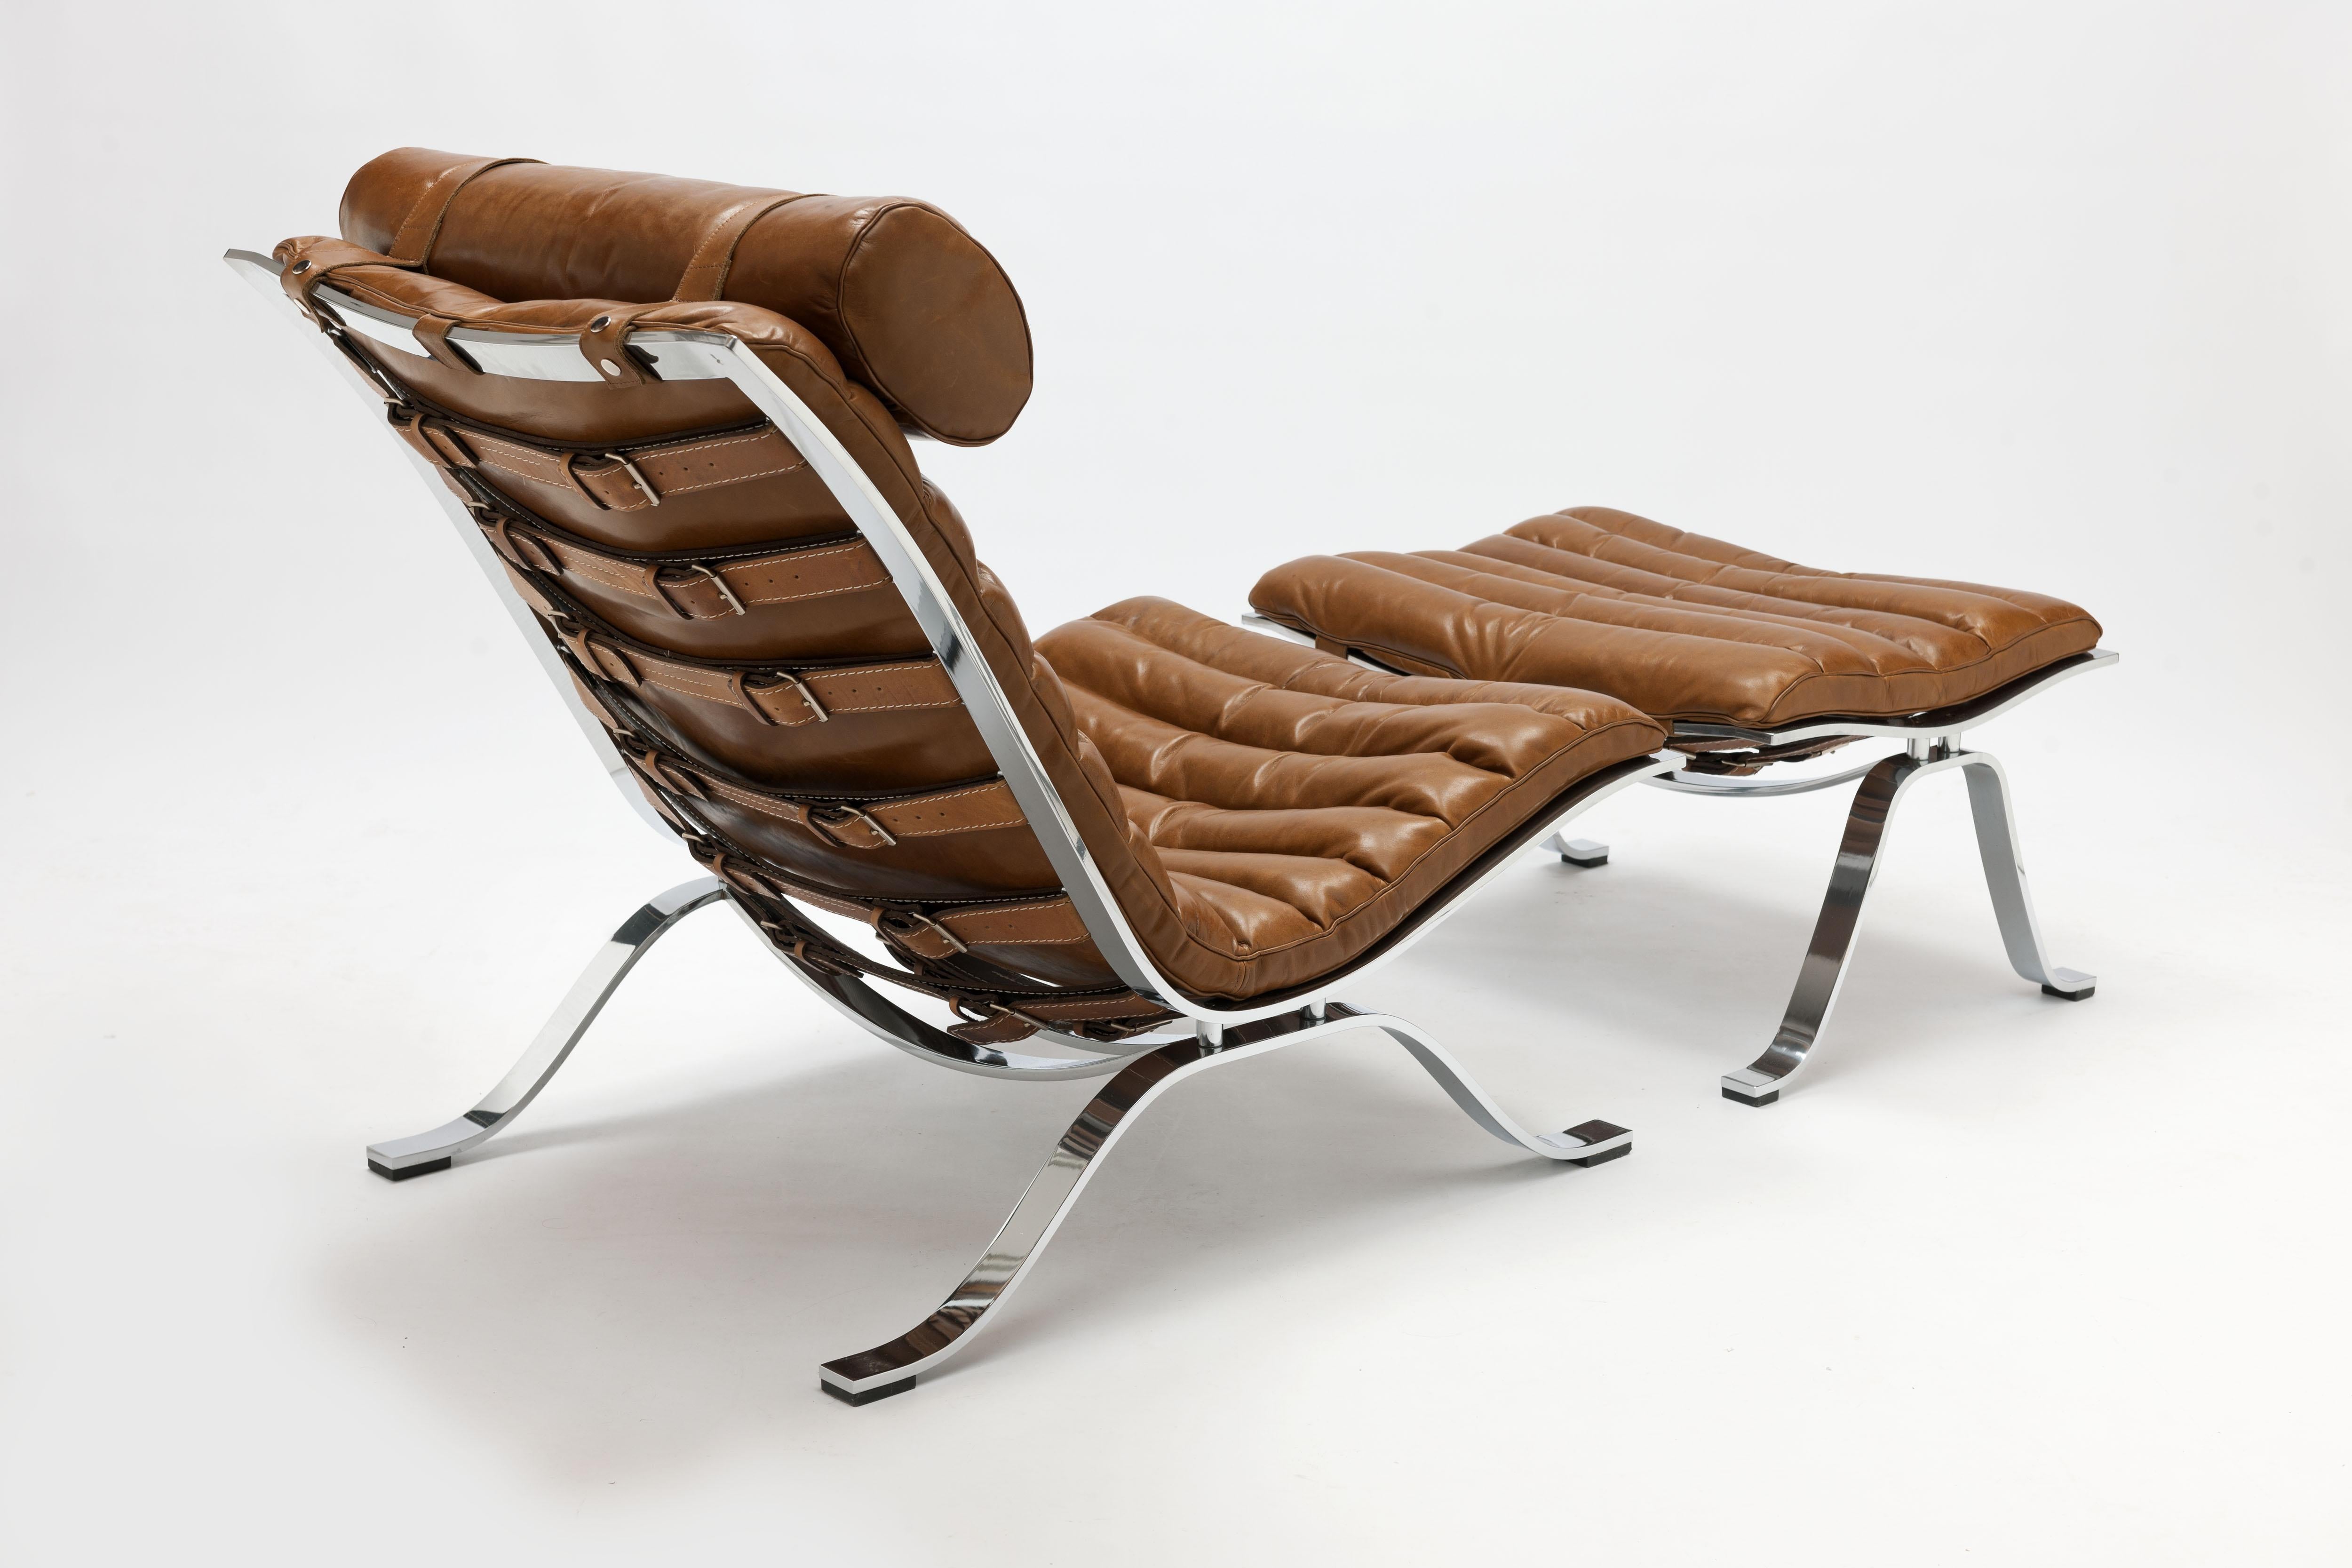 Vintage Ari lounge chair and ottoman with beautiful high gloss chrome steel frame designed by Swedish designer Arne Norell in 1966. One of the most timeless iconic and most comfortable designs of the 20th century. This vintage lounge chair and